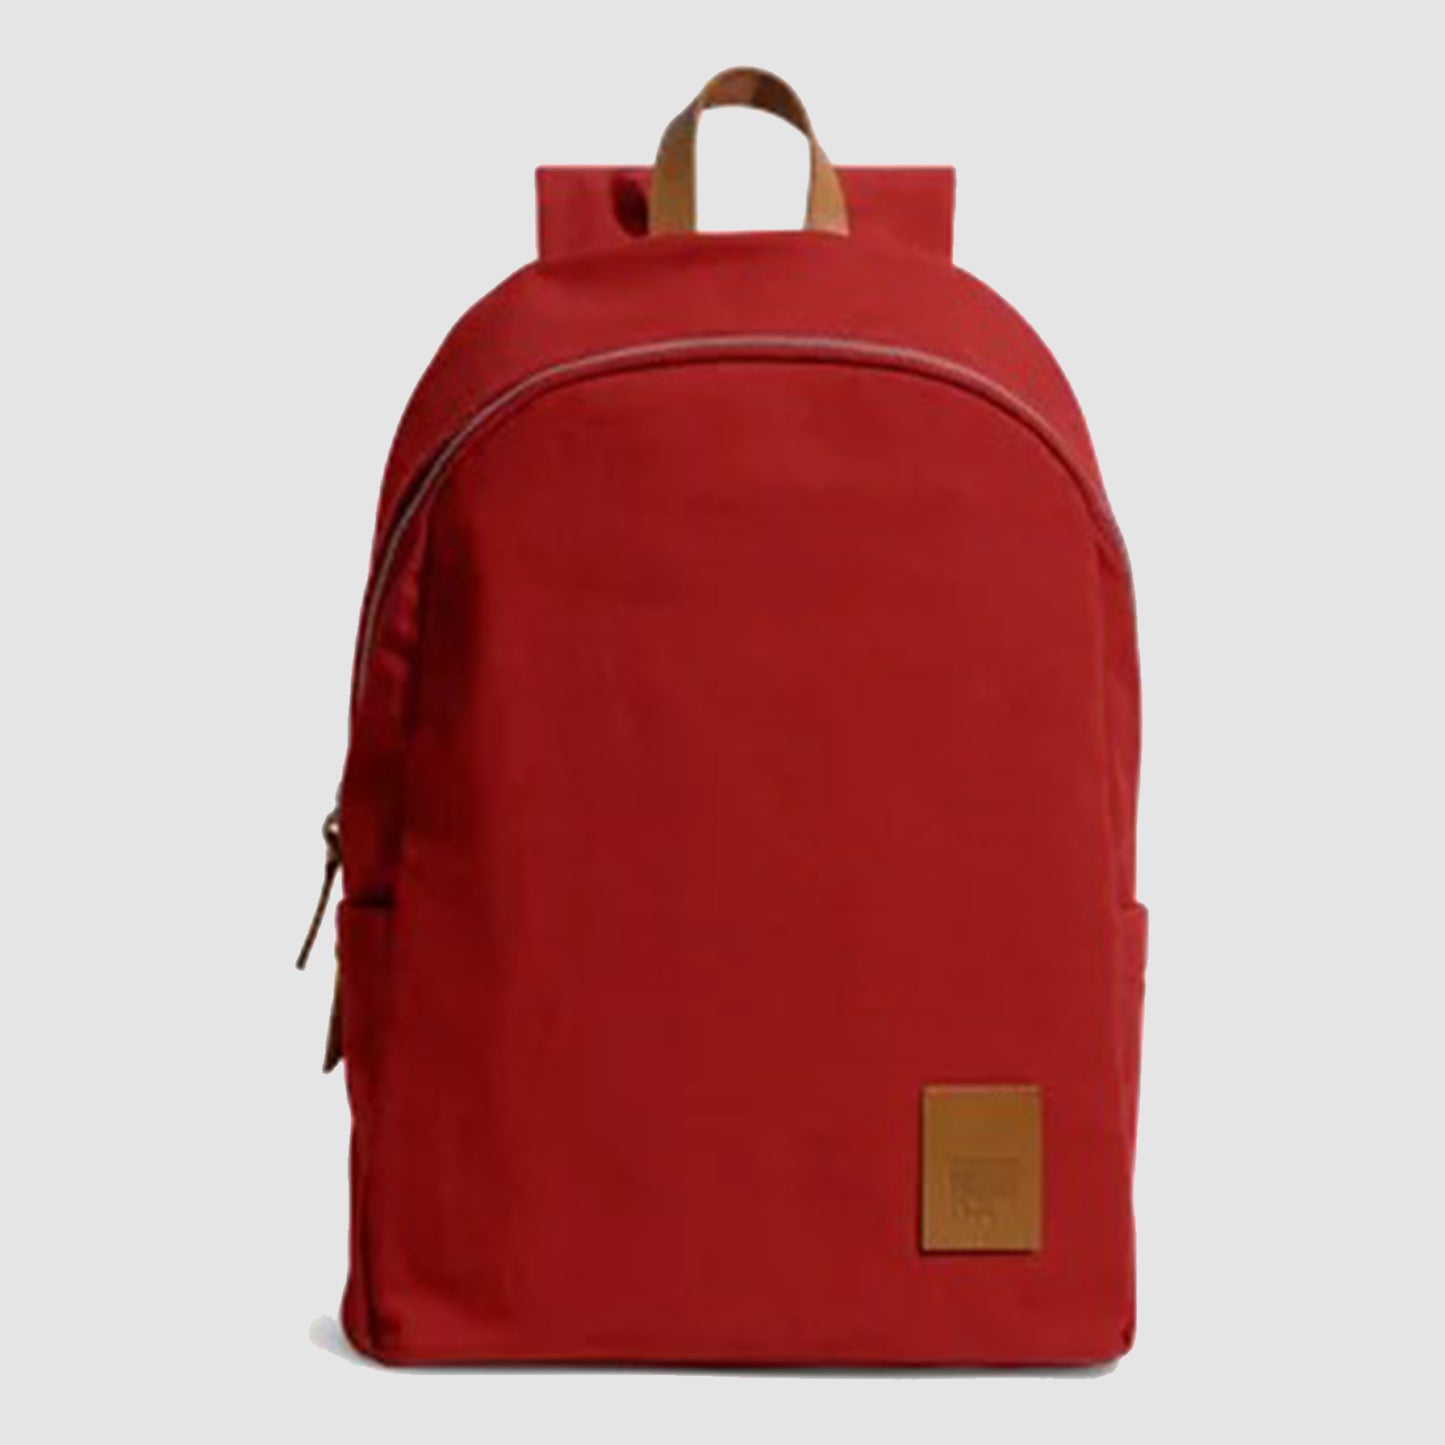 DailyObjects- All Ivory Pedal Daypack- BO